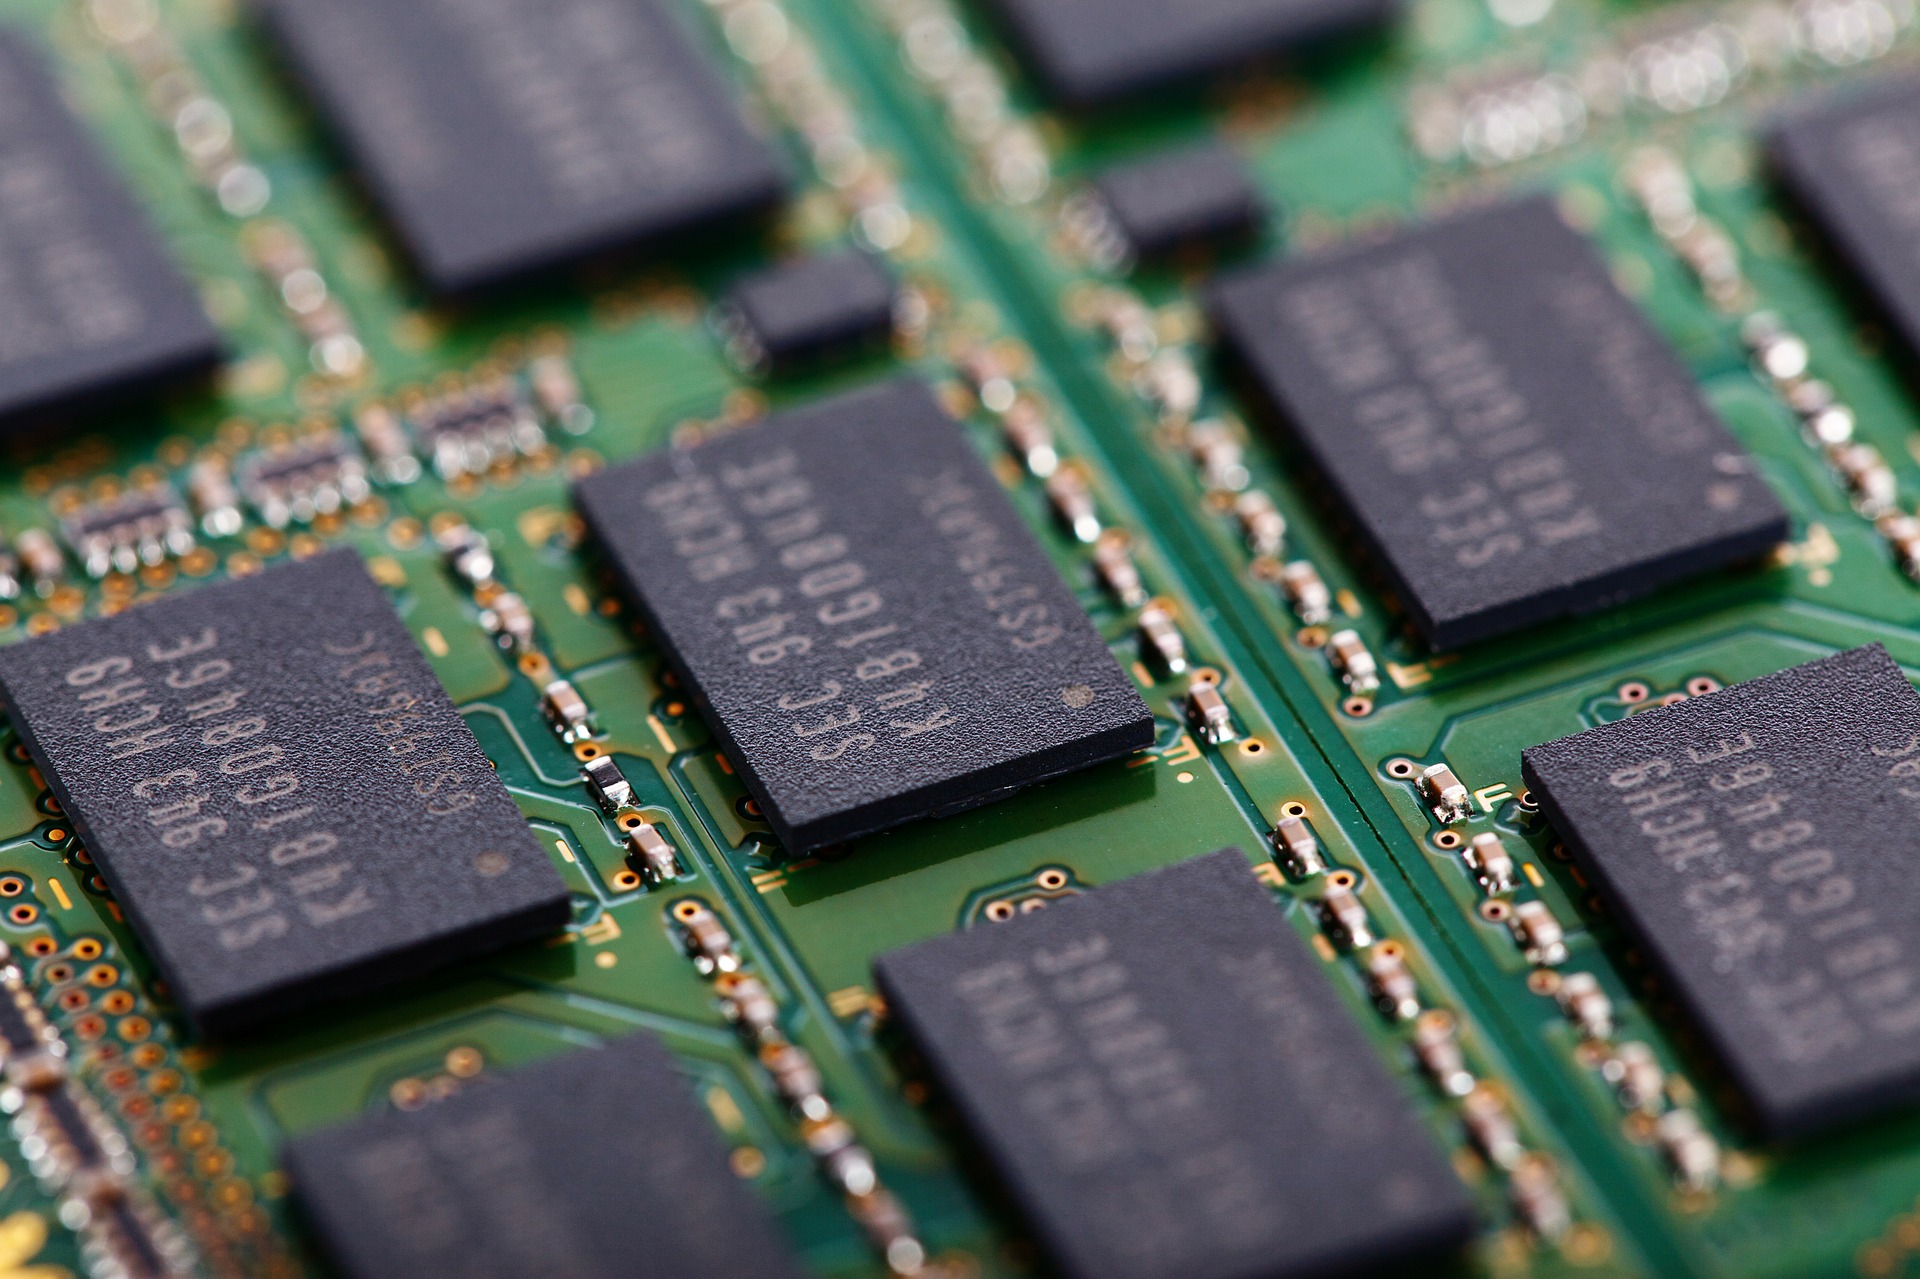 DRAM prices drop 10%, will continue to fall over coming months